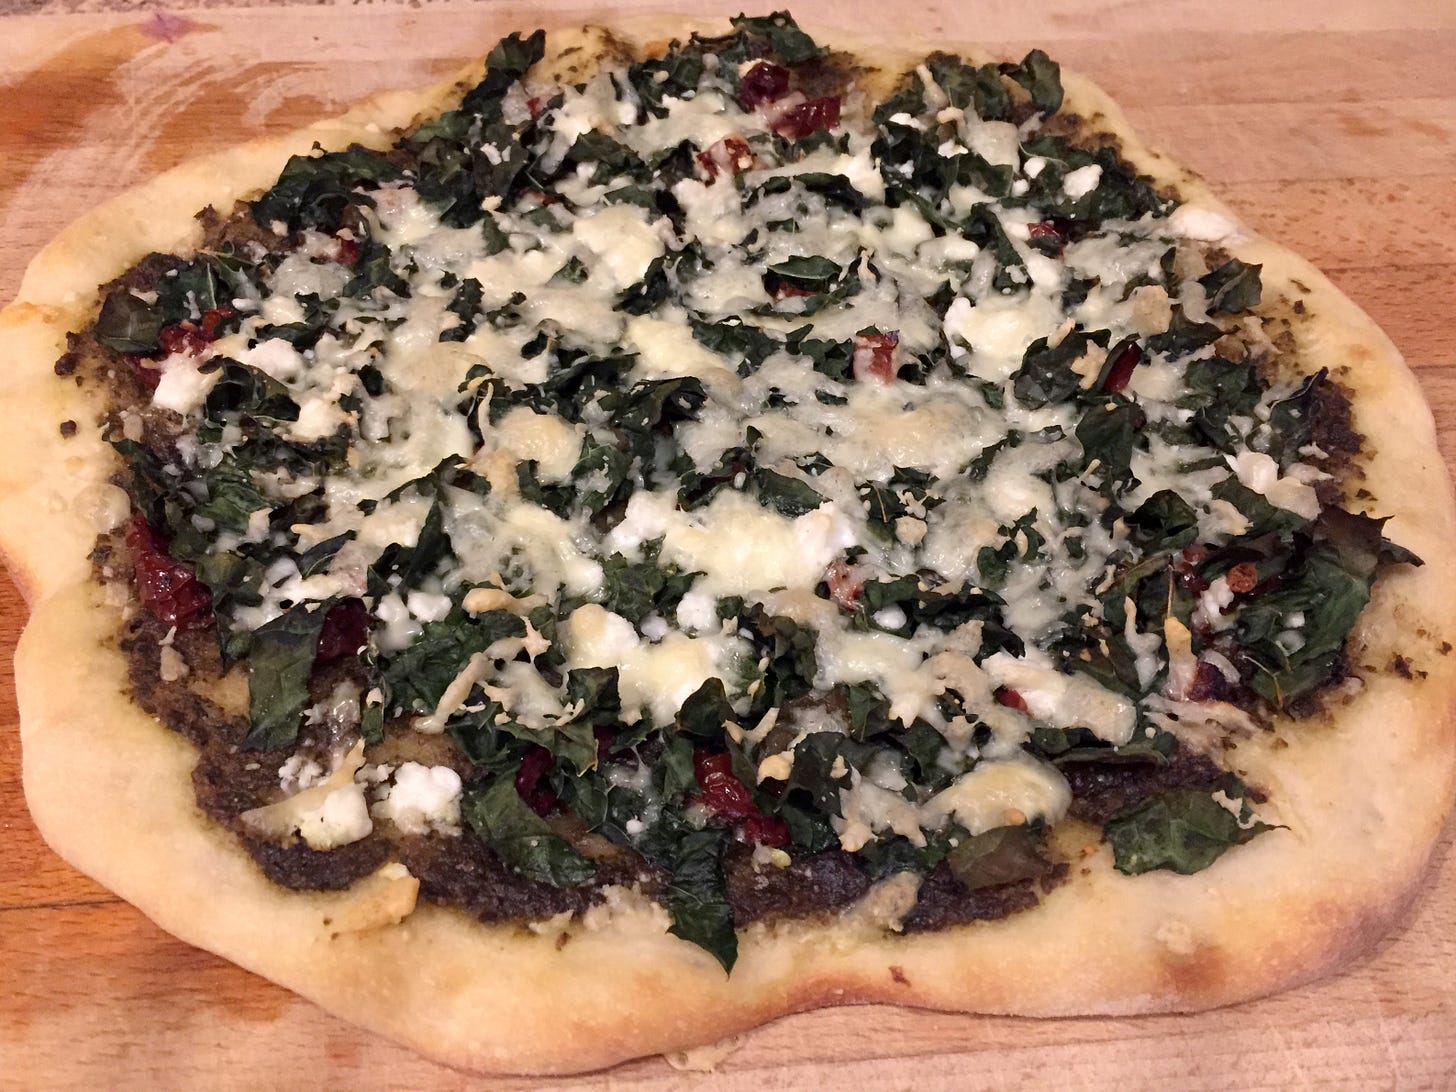 on a wooden cutting board, a hand-stretched, uneven pizza with a pesto base, kale, and sundried tomatoes. Crumbles of feta and melted, lightly browned mozza sit on top.